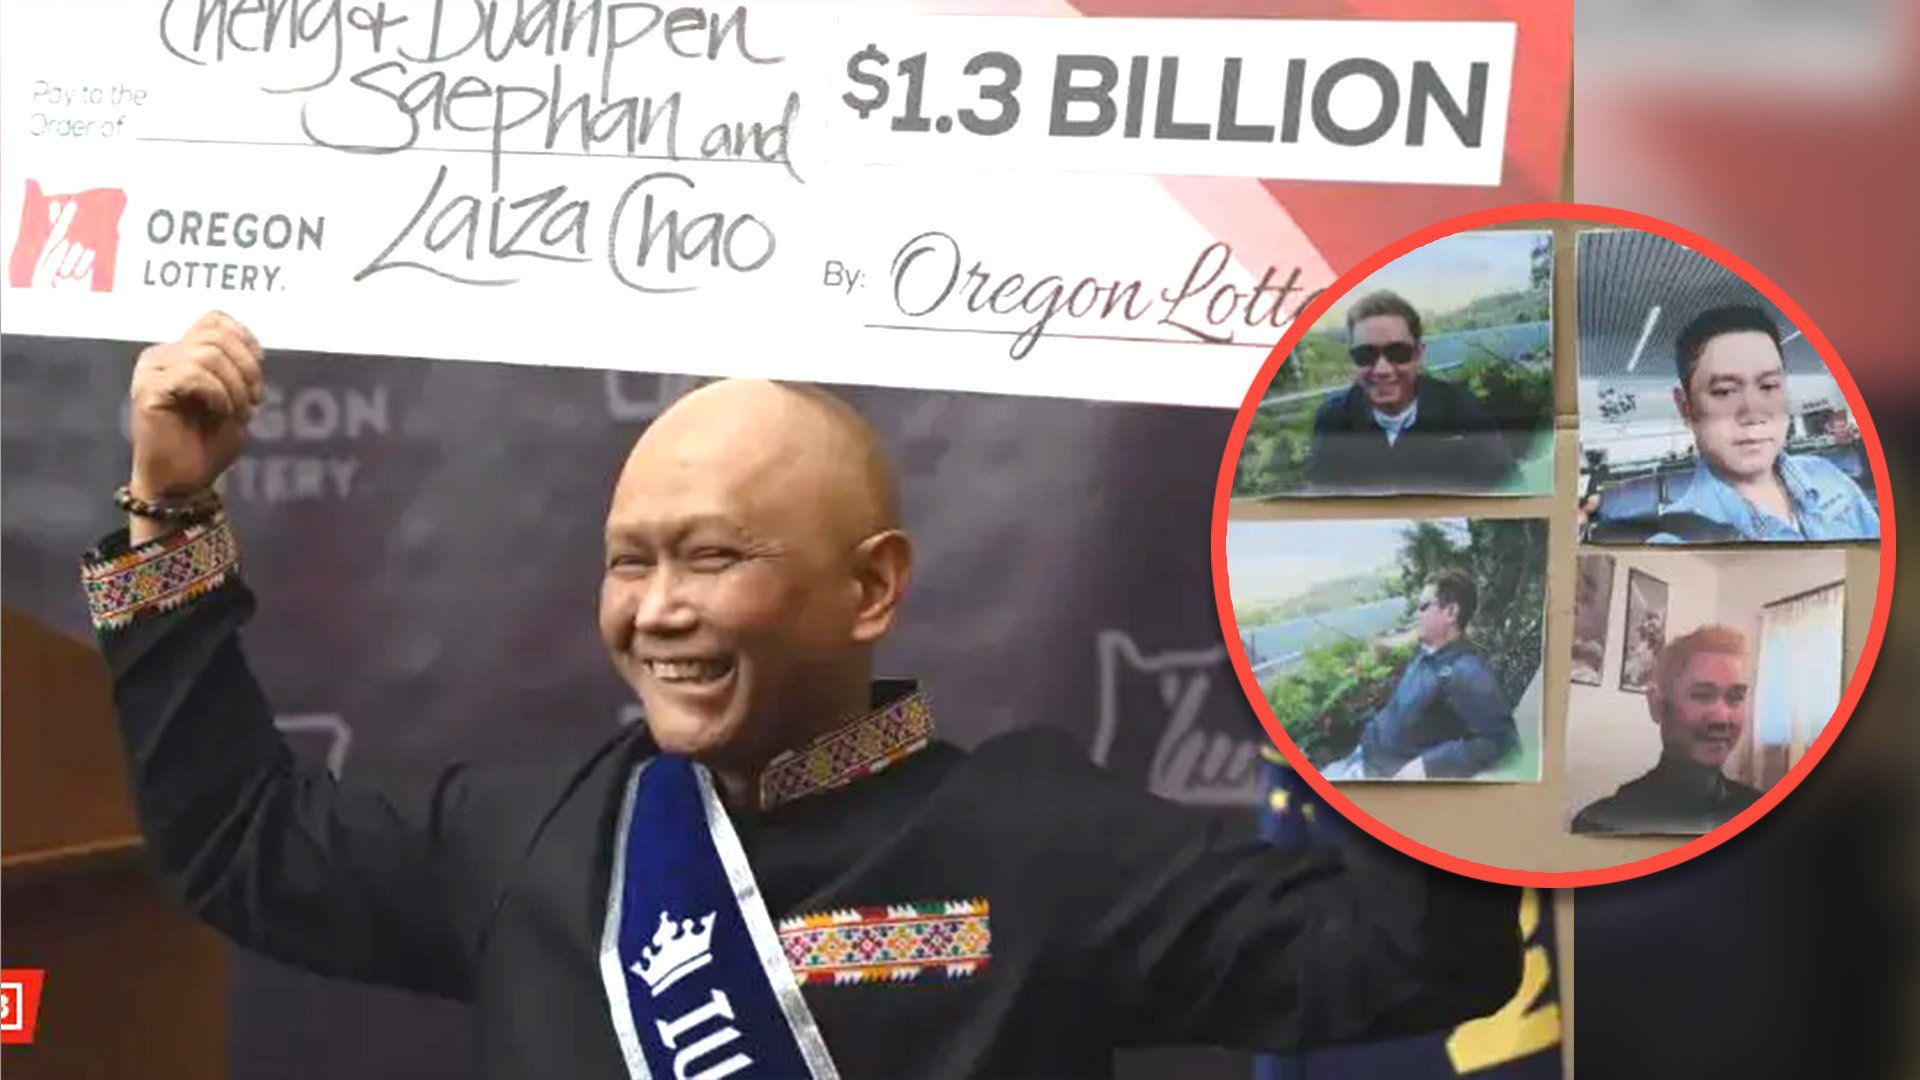 A Laotian immigrant to the United States has scooped a US$400 million win on the lottery after sharing the total US$1.3 billion prize with his wife and a friend. Photo: SCMP composite/163.com